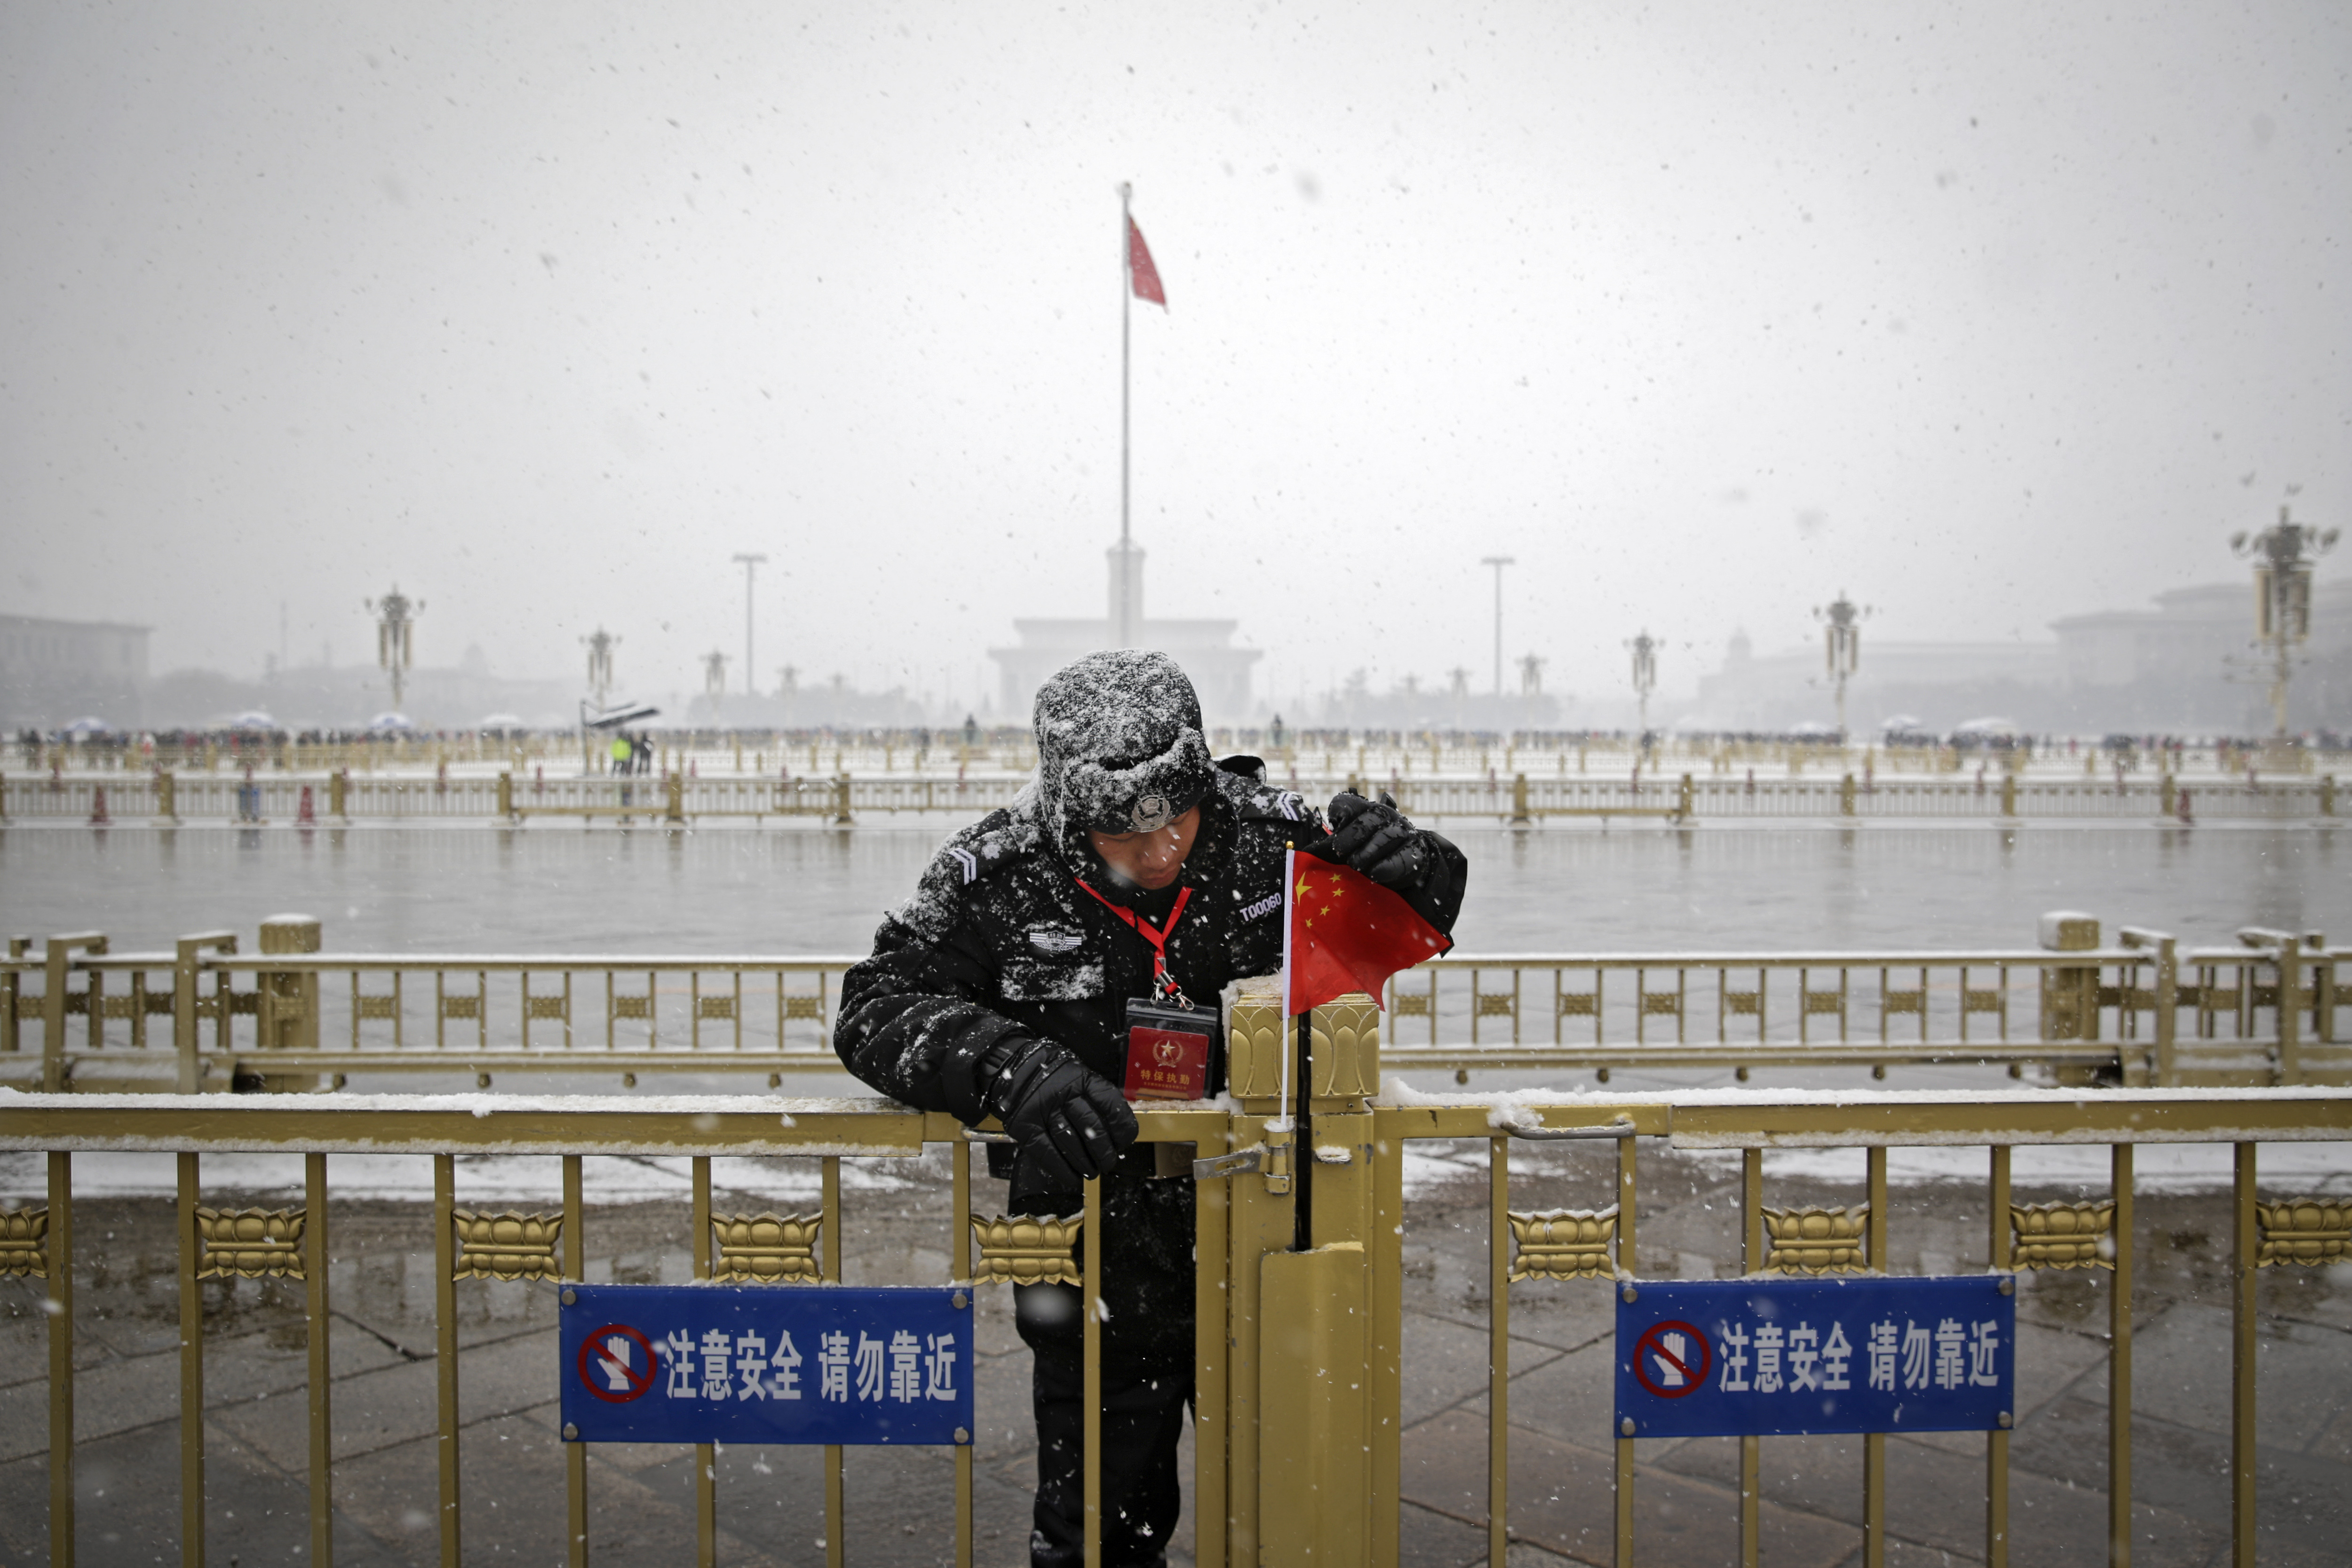 A policeman adjusts a national flag sticks on the barrier against Tiananmen Square as snow falls in Beijing, Tuesday, Feb. 12, 2019. China's capital is mostly dry in the winter but a storm system brought snow to the city on Tuesday morning. (AP Photo/Andy Wong)